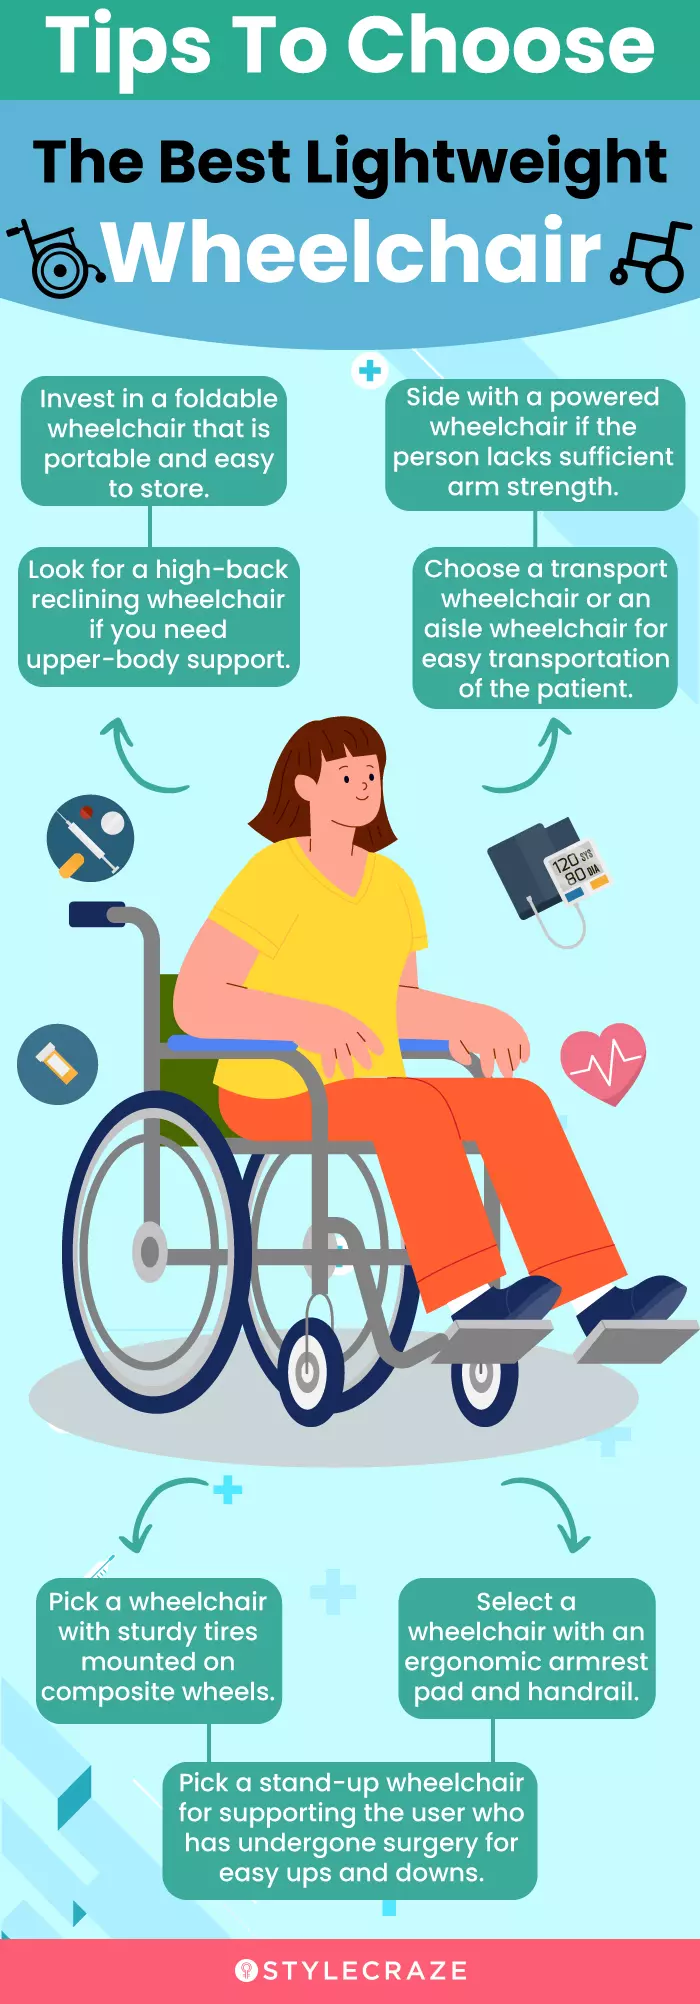 Tips To Choose The Best Lightweight Wheelchair (infographic)